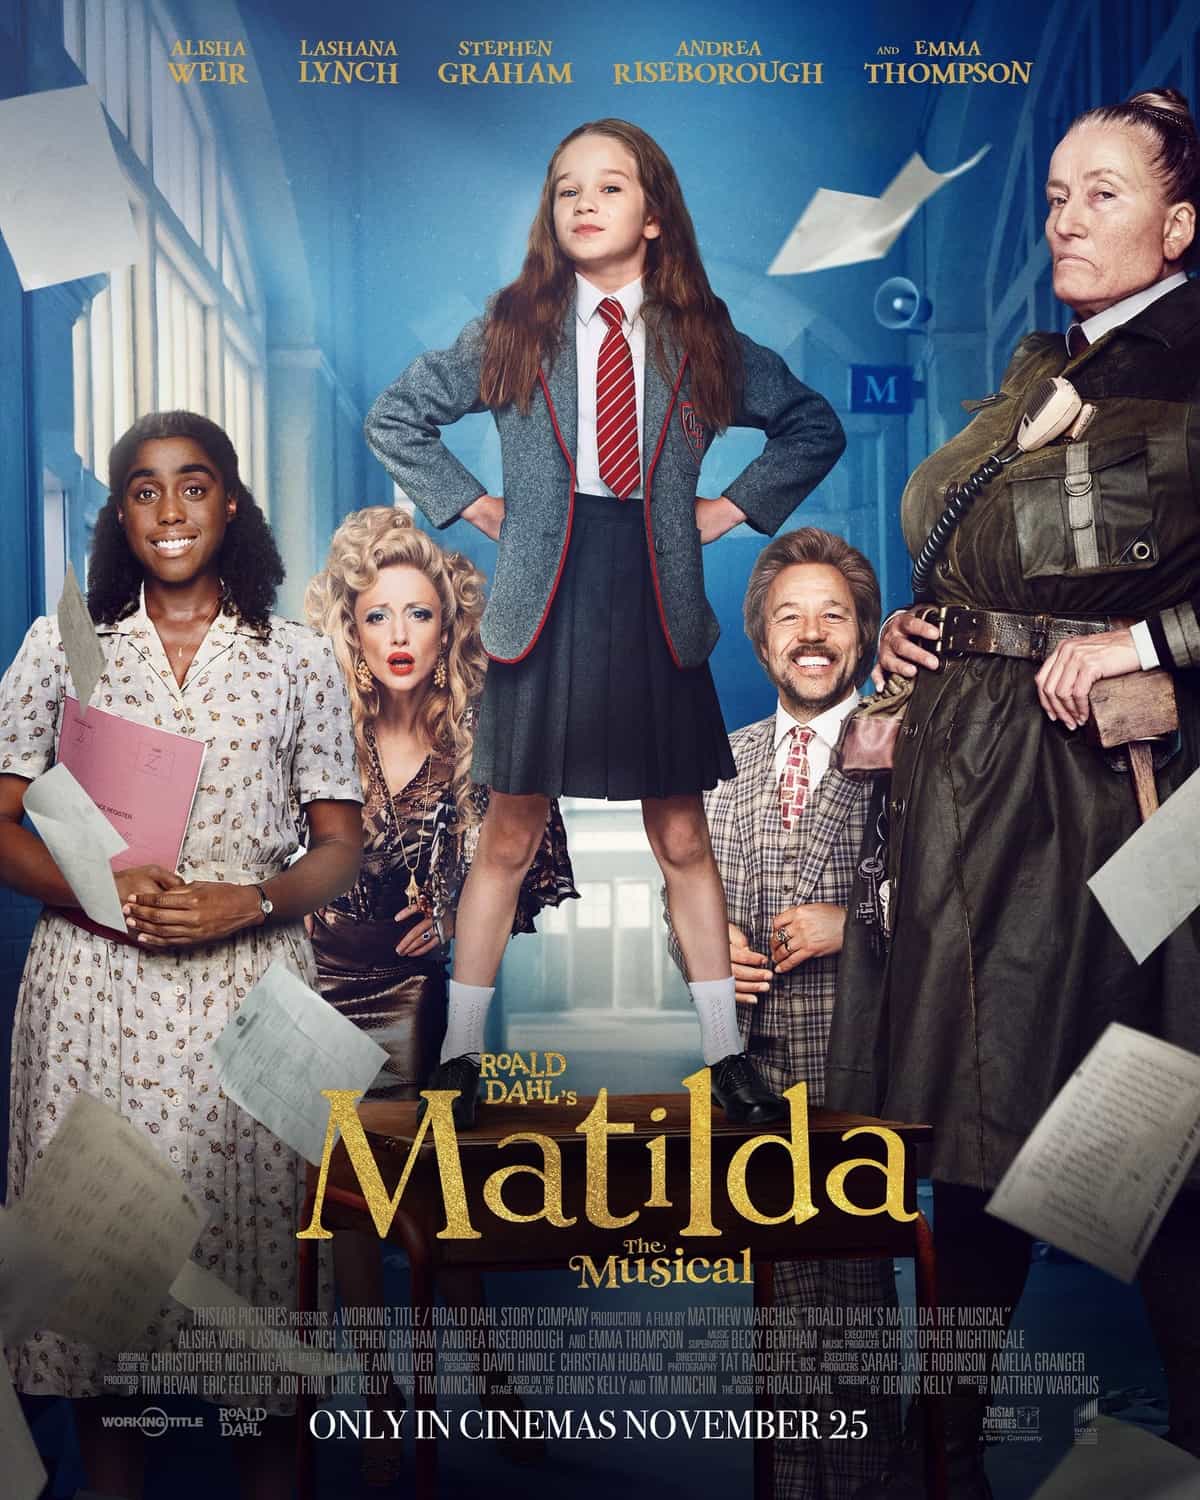 UK Box Office Weekend Report 25th - 27th November 2022:  From the story by Roald Dahl, Matilda The Musical makes its debut at the top of the UK box office